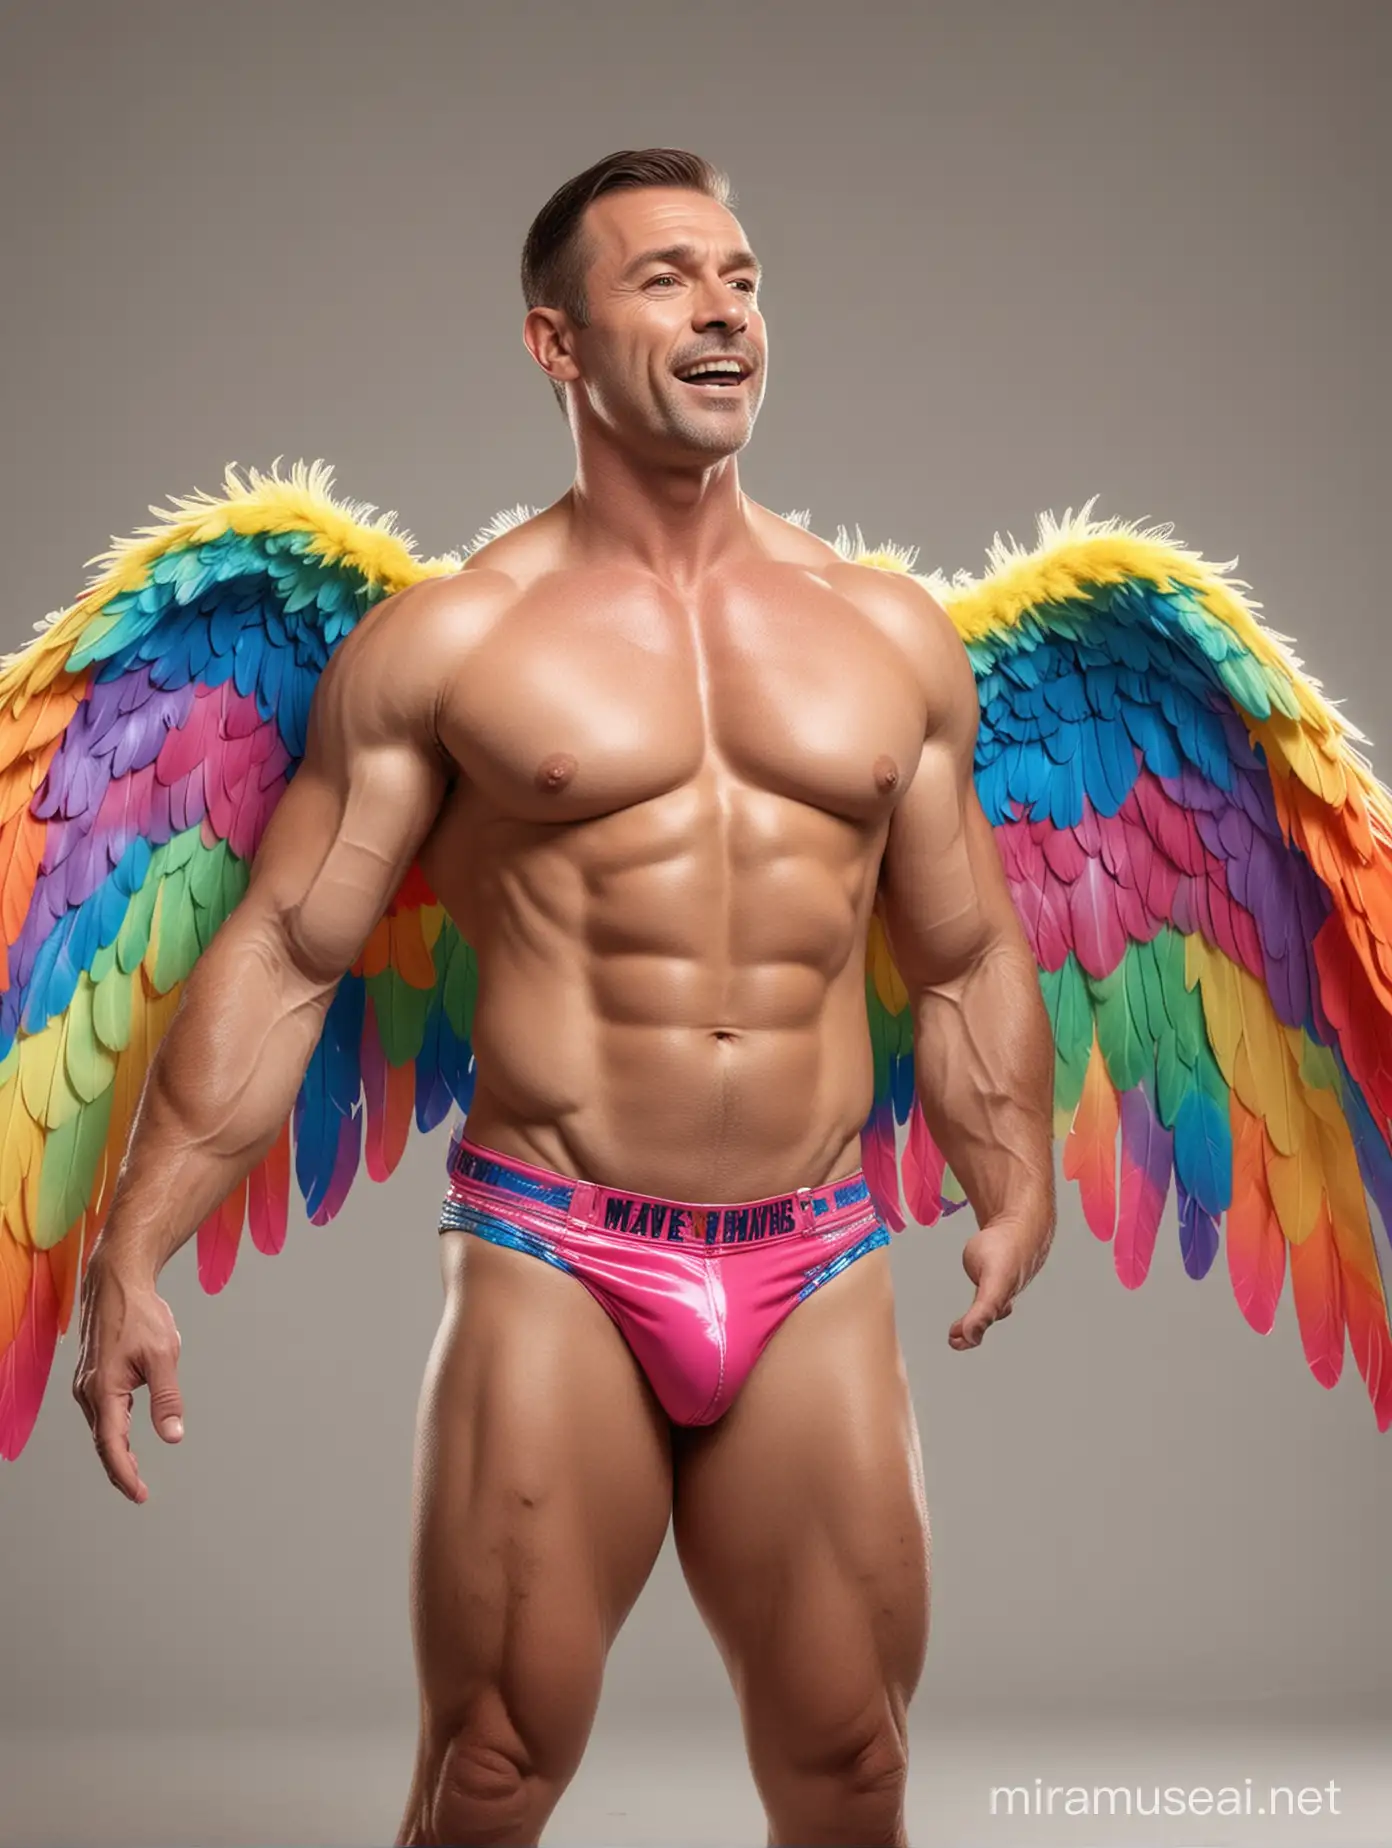 Muscular 40s Bodybuilder Flexing with Bright Rainbow Colored Eagle Wings Jacket and Doraemon